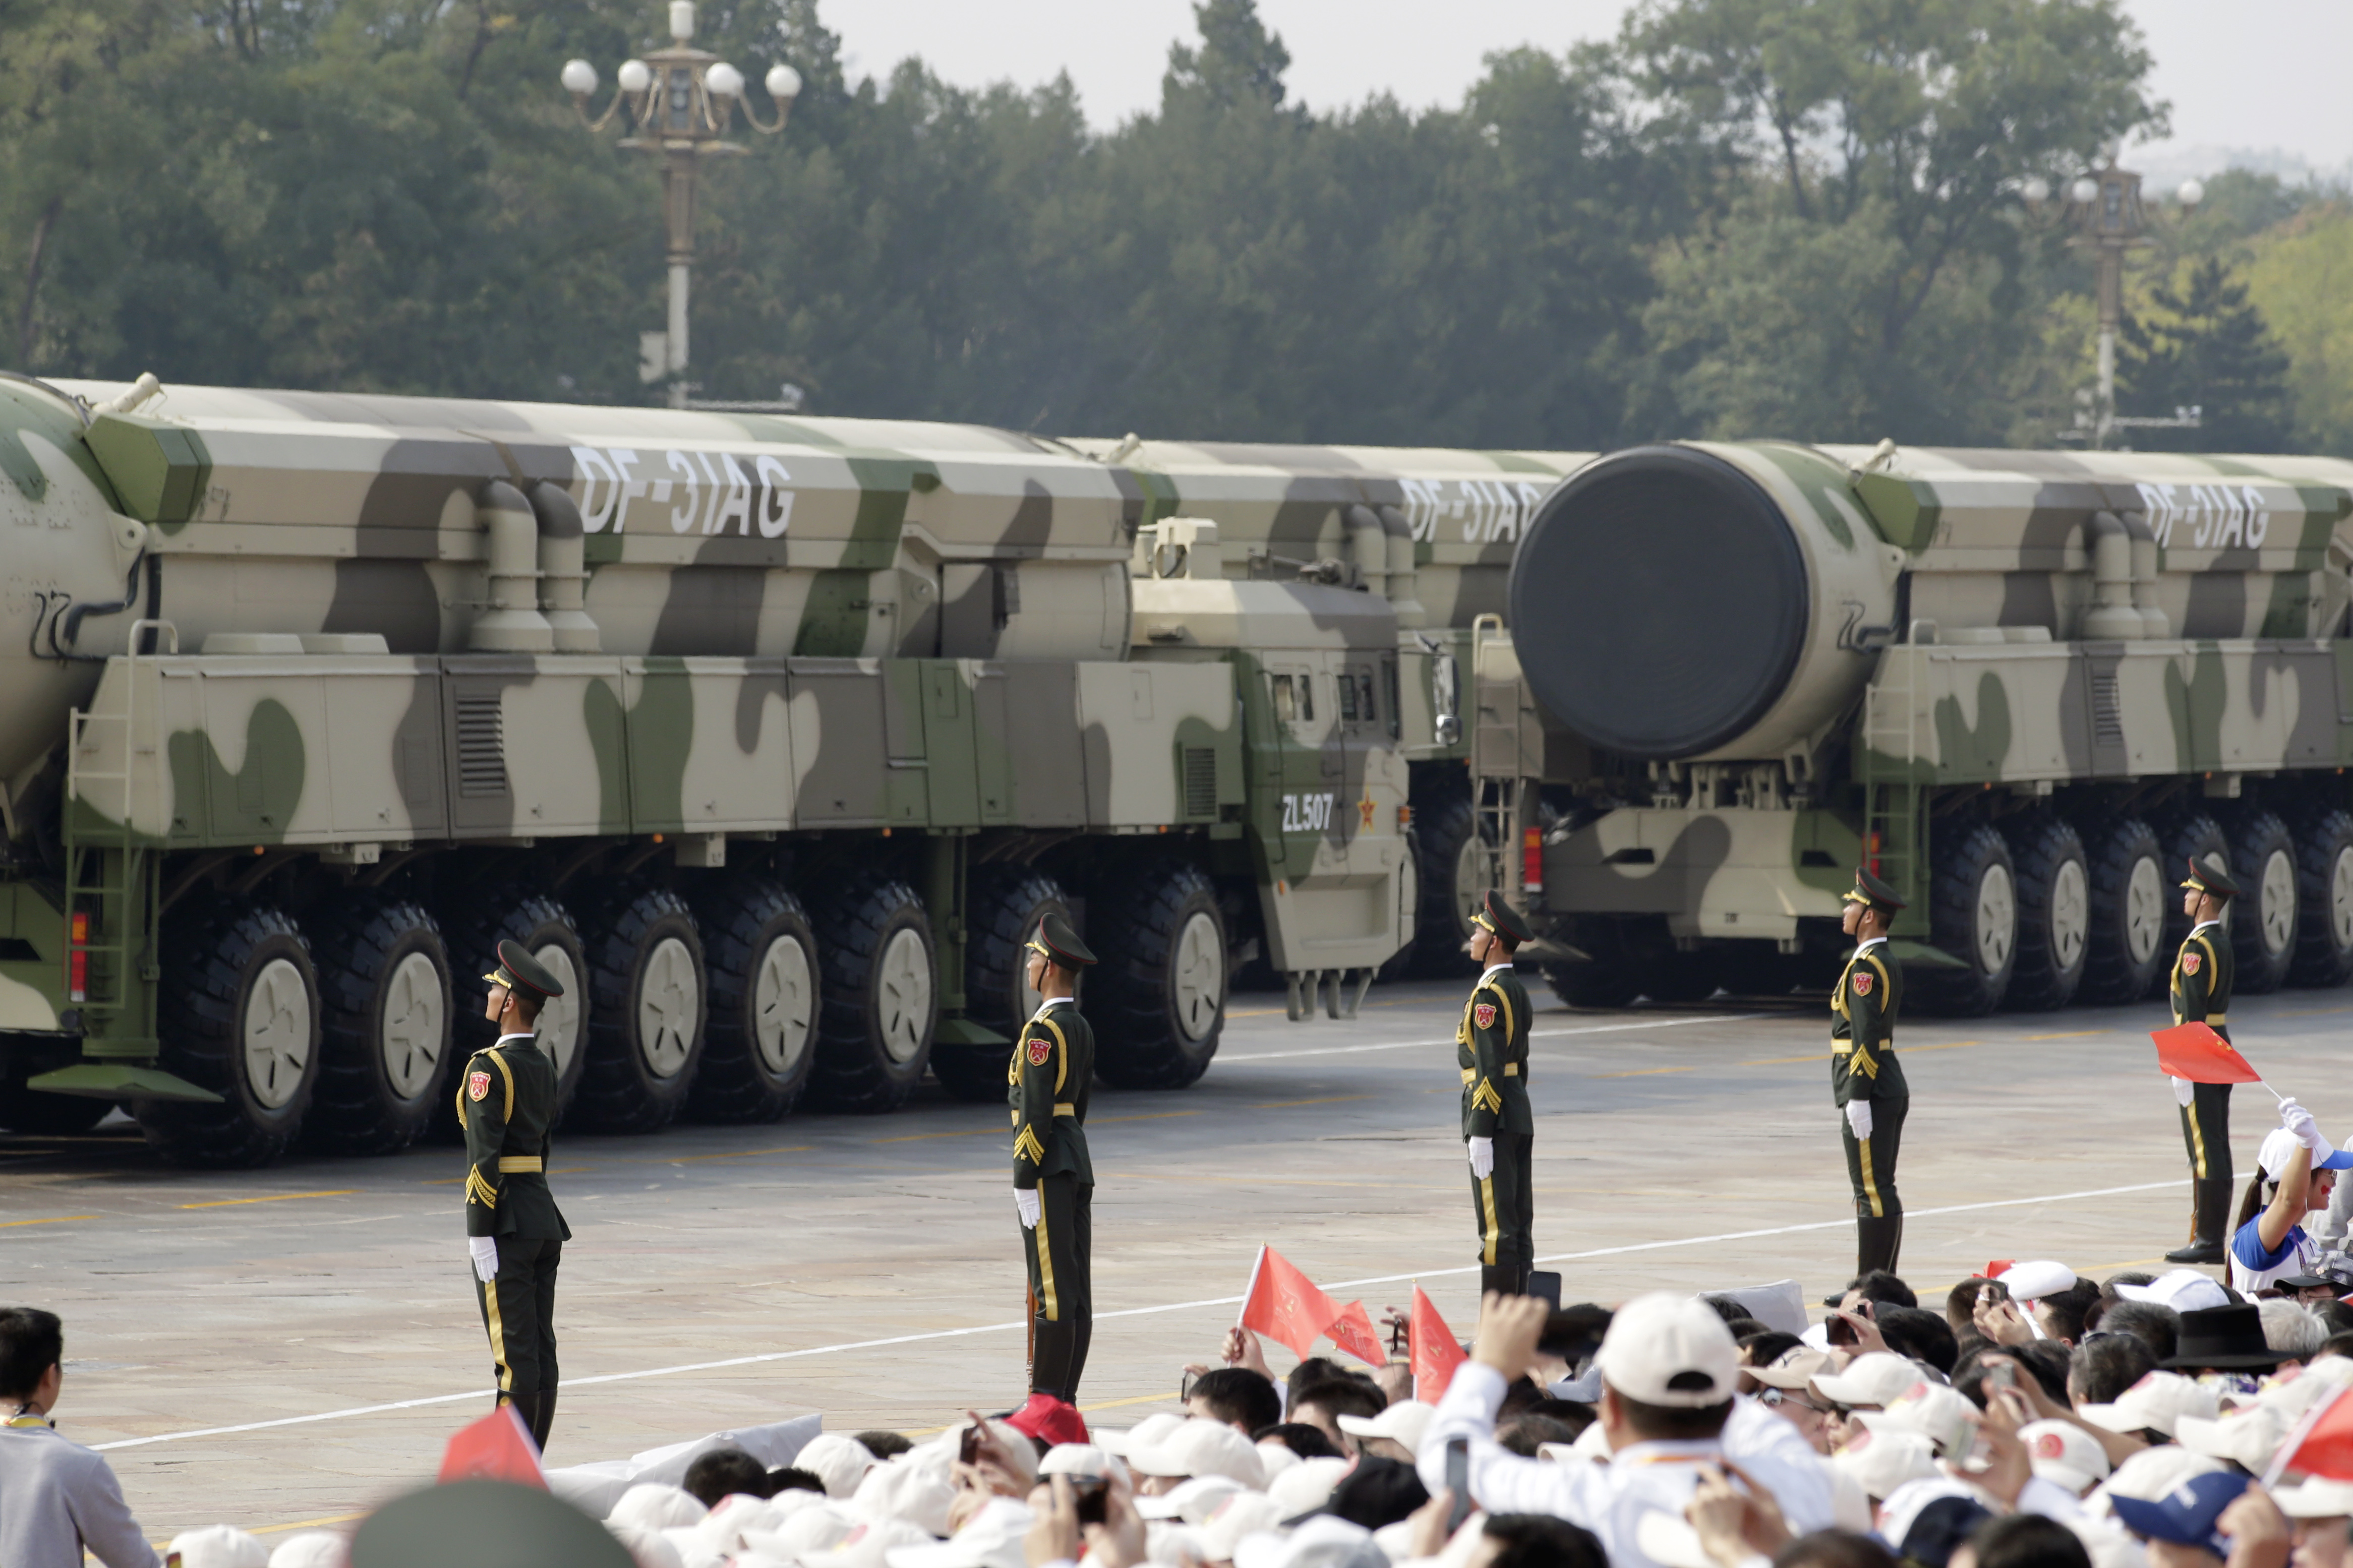 The DF-31AG missiles are part of the arsenal exhibited by the Xi Jinping regime